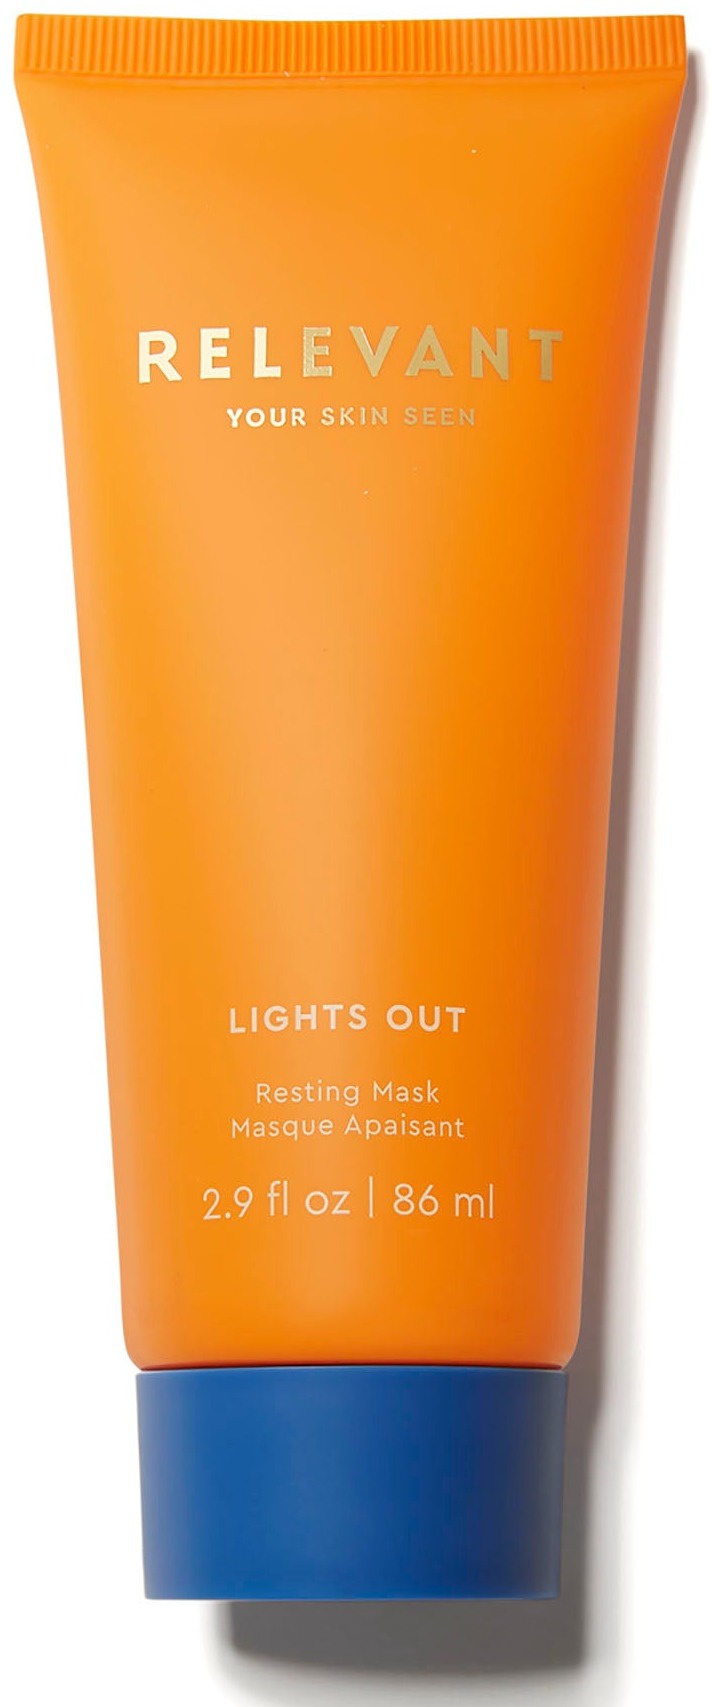 Relevant: Your Skin Seen Lights Out Resting Mask